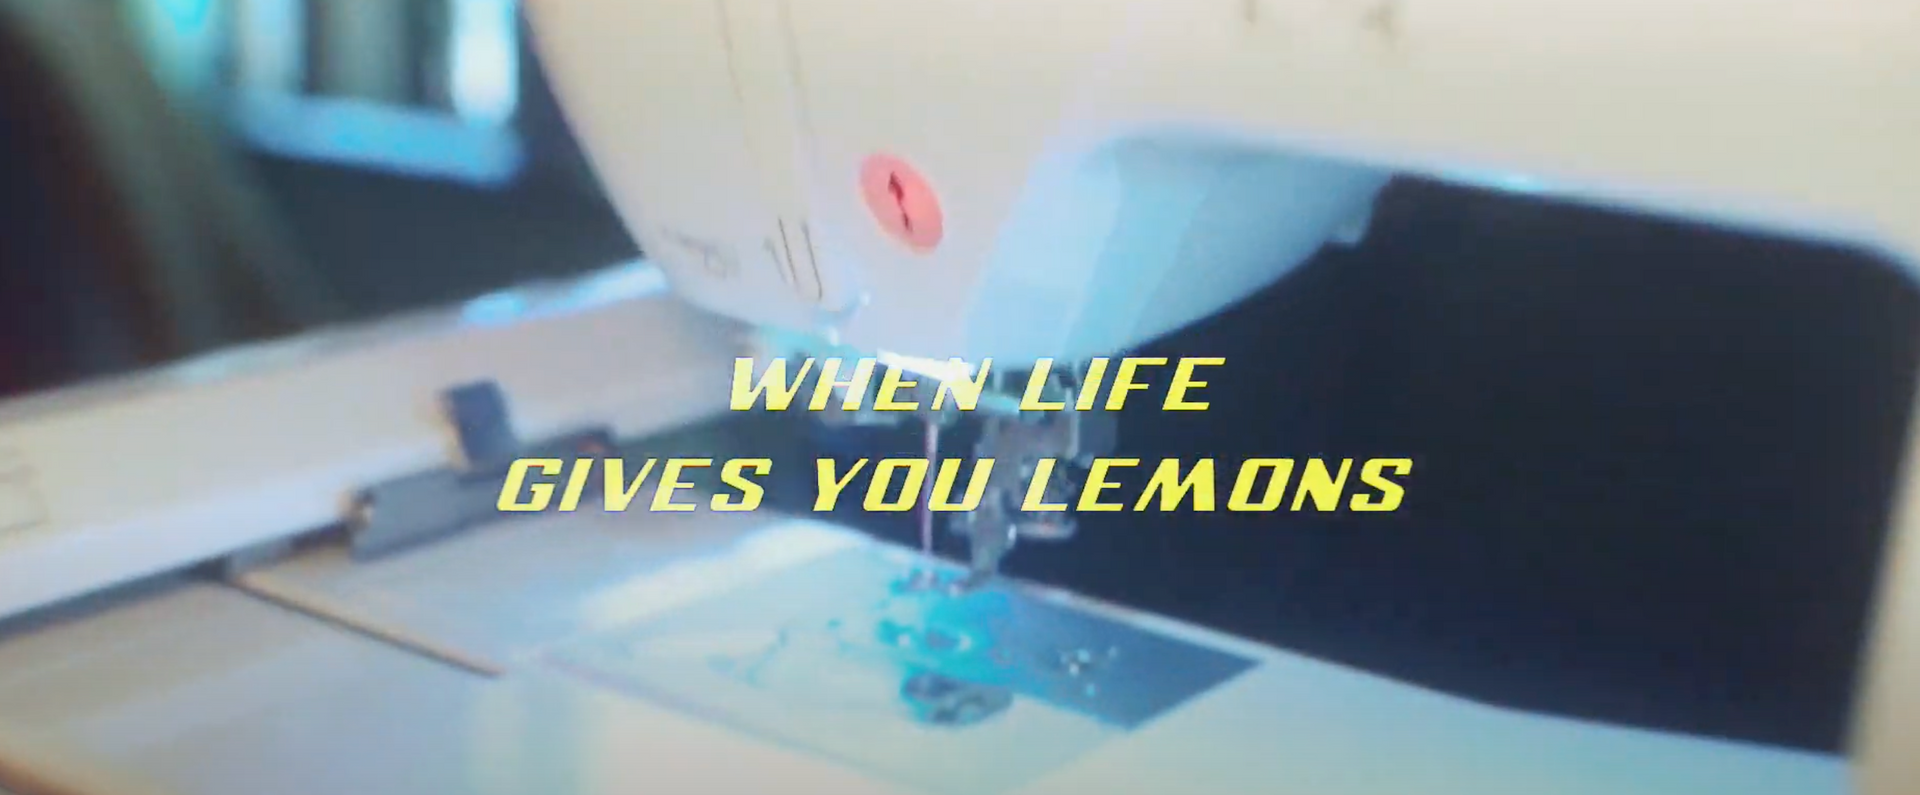 Load video: when life gives you lemons montage of lemonade51o business in the bay area san leandro stickers, clothes,